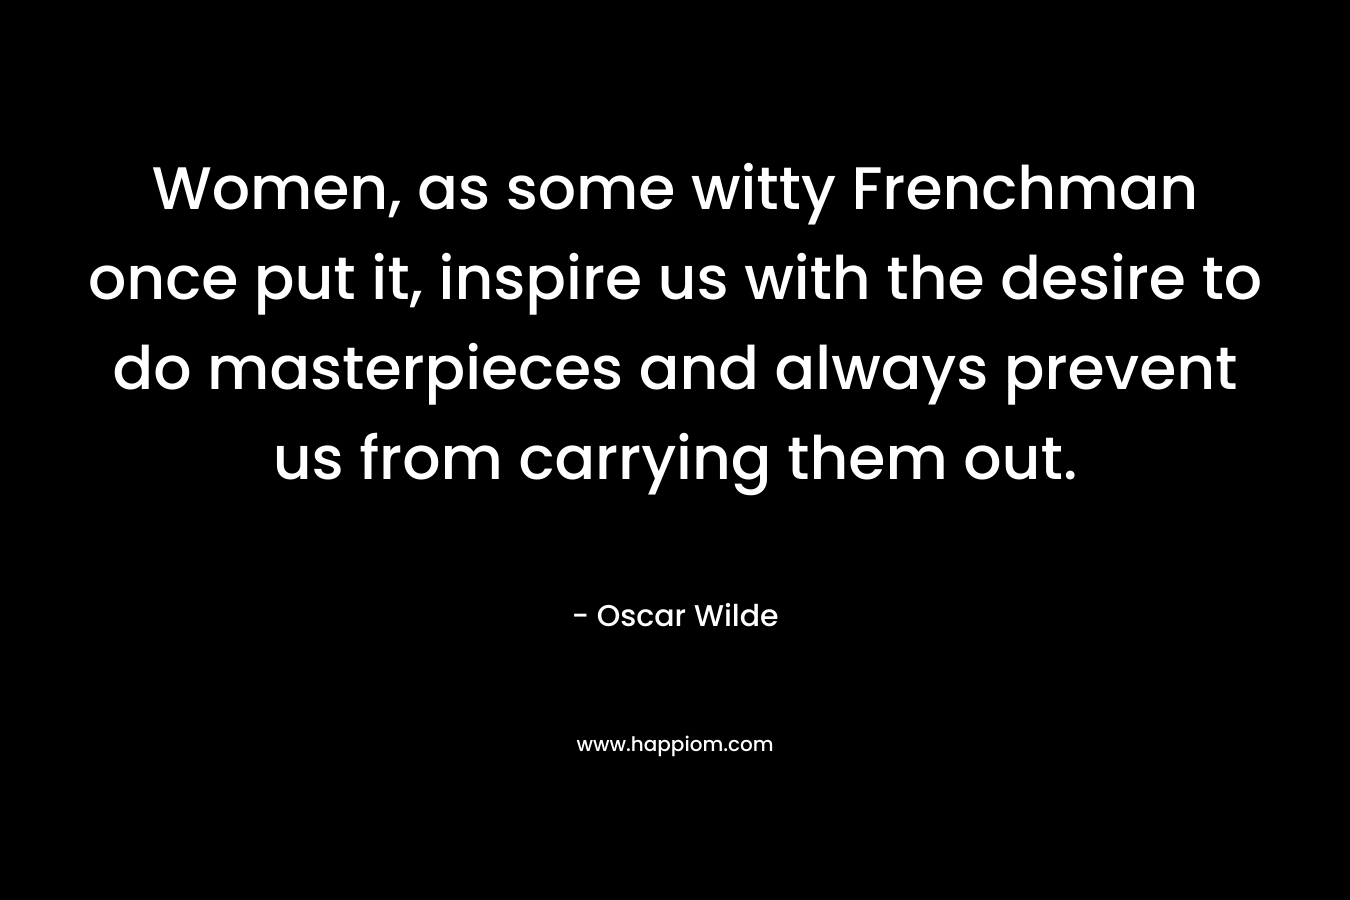 Women, as some witty Frenchman once put it, inspire us with the desire to do masterpieces and always prevent us from carrying them out. – Oscar Wilde